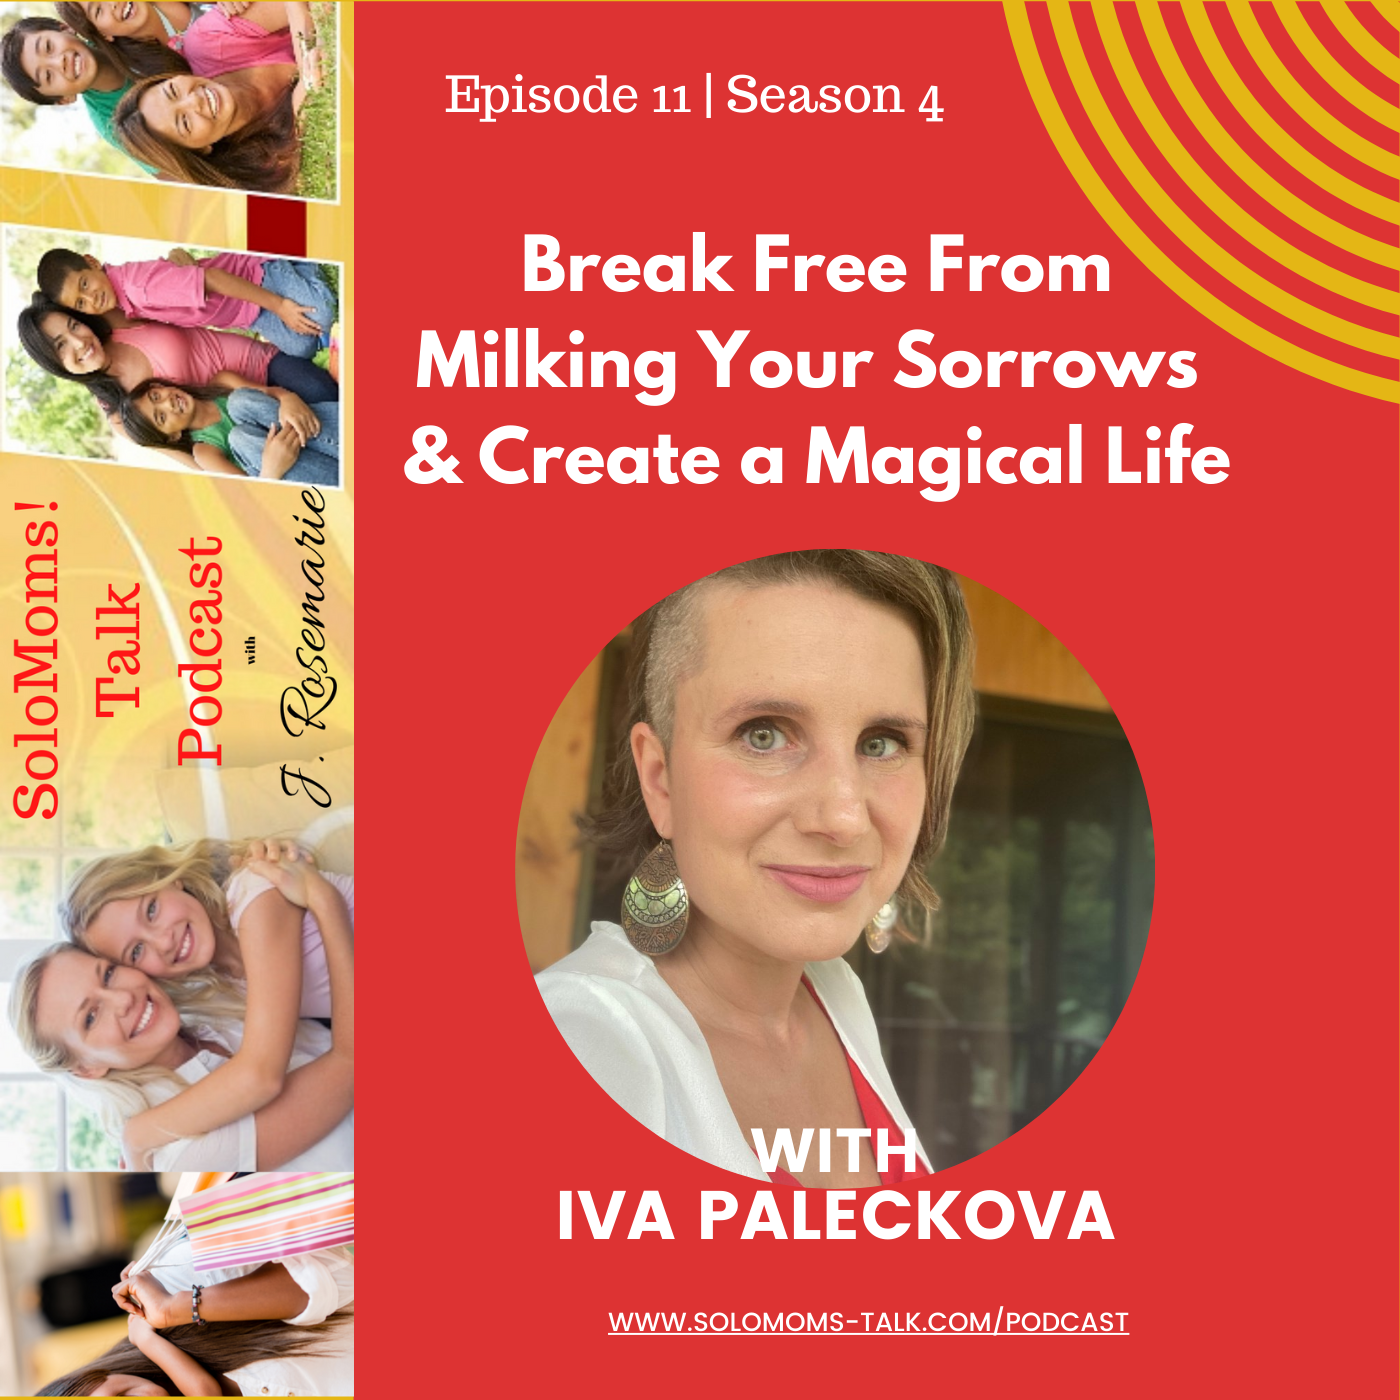 Break Free From Milking Your Sorrows & Create a Magical Life w/Iva Paleckova